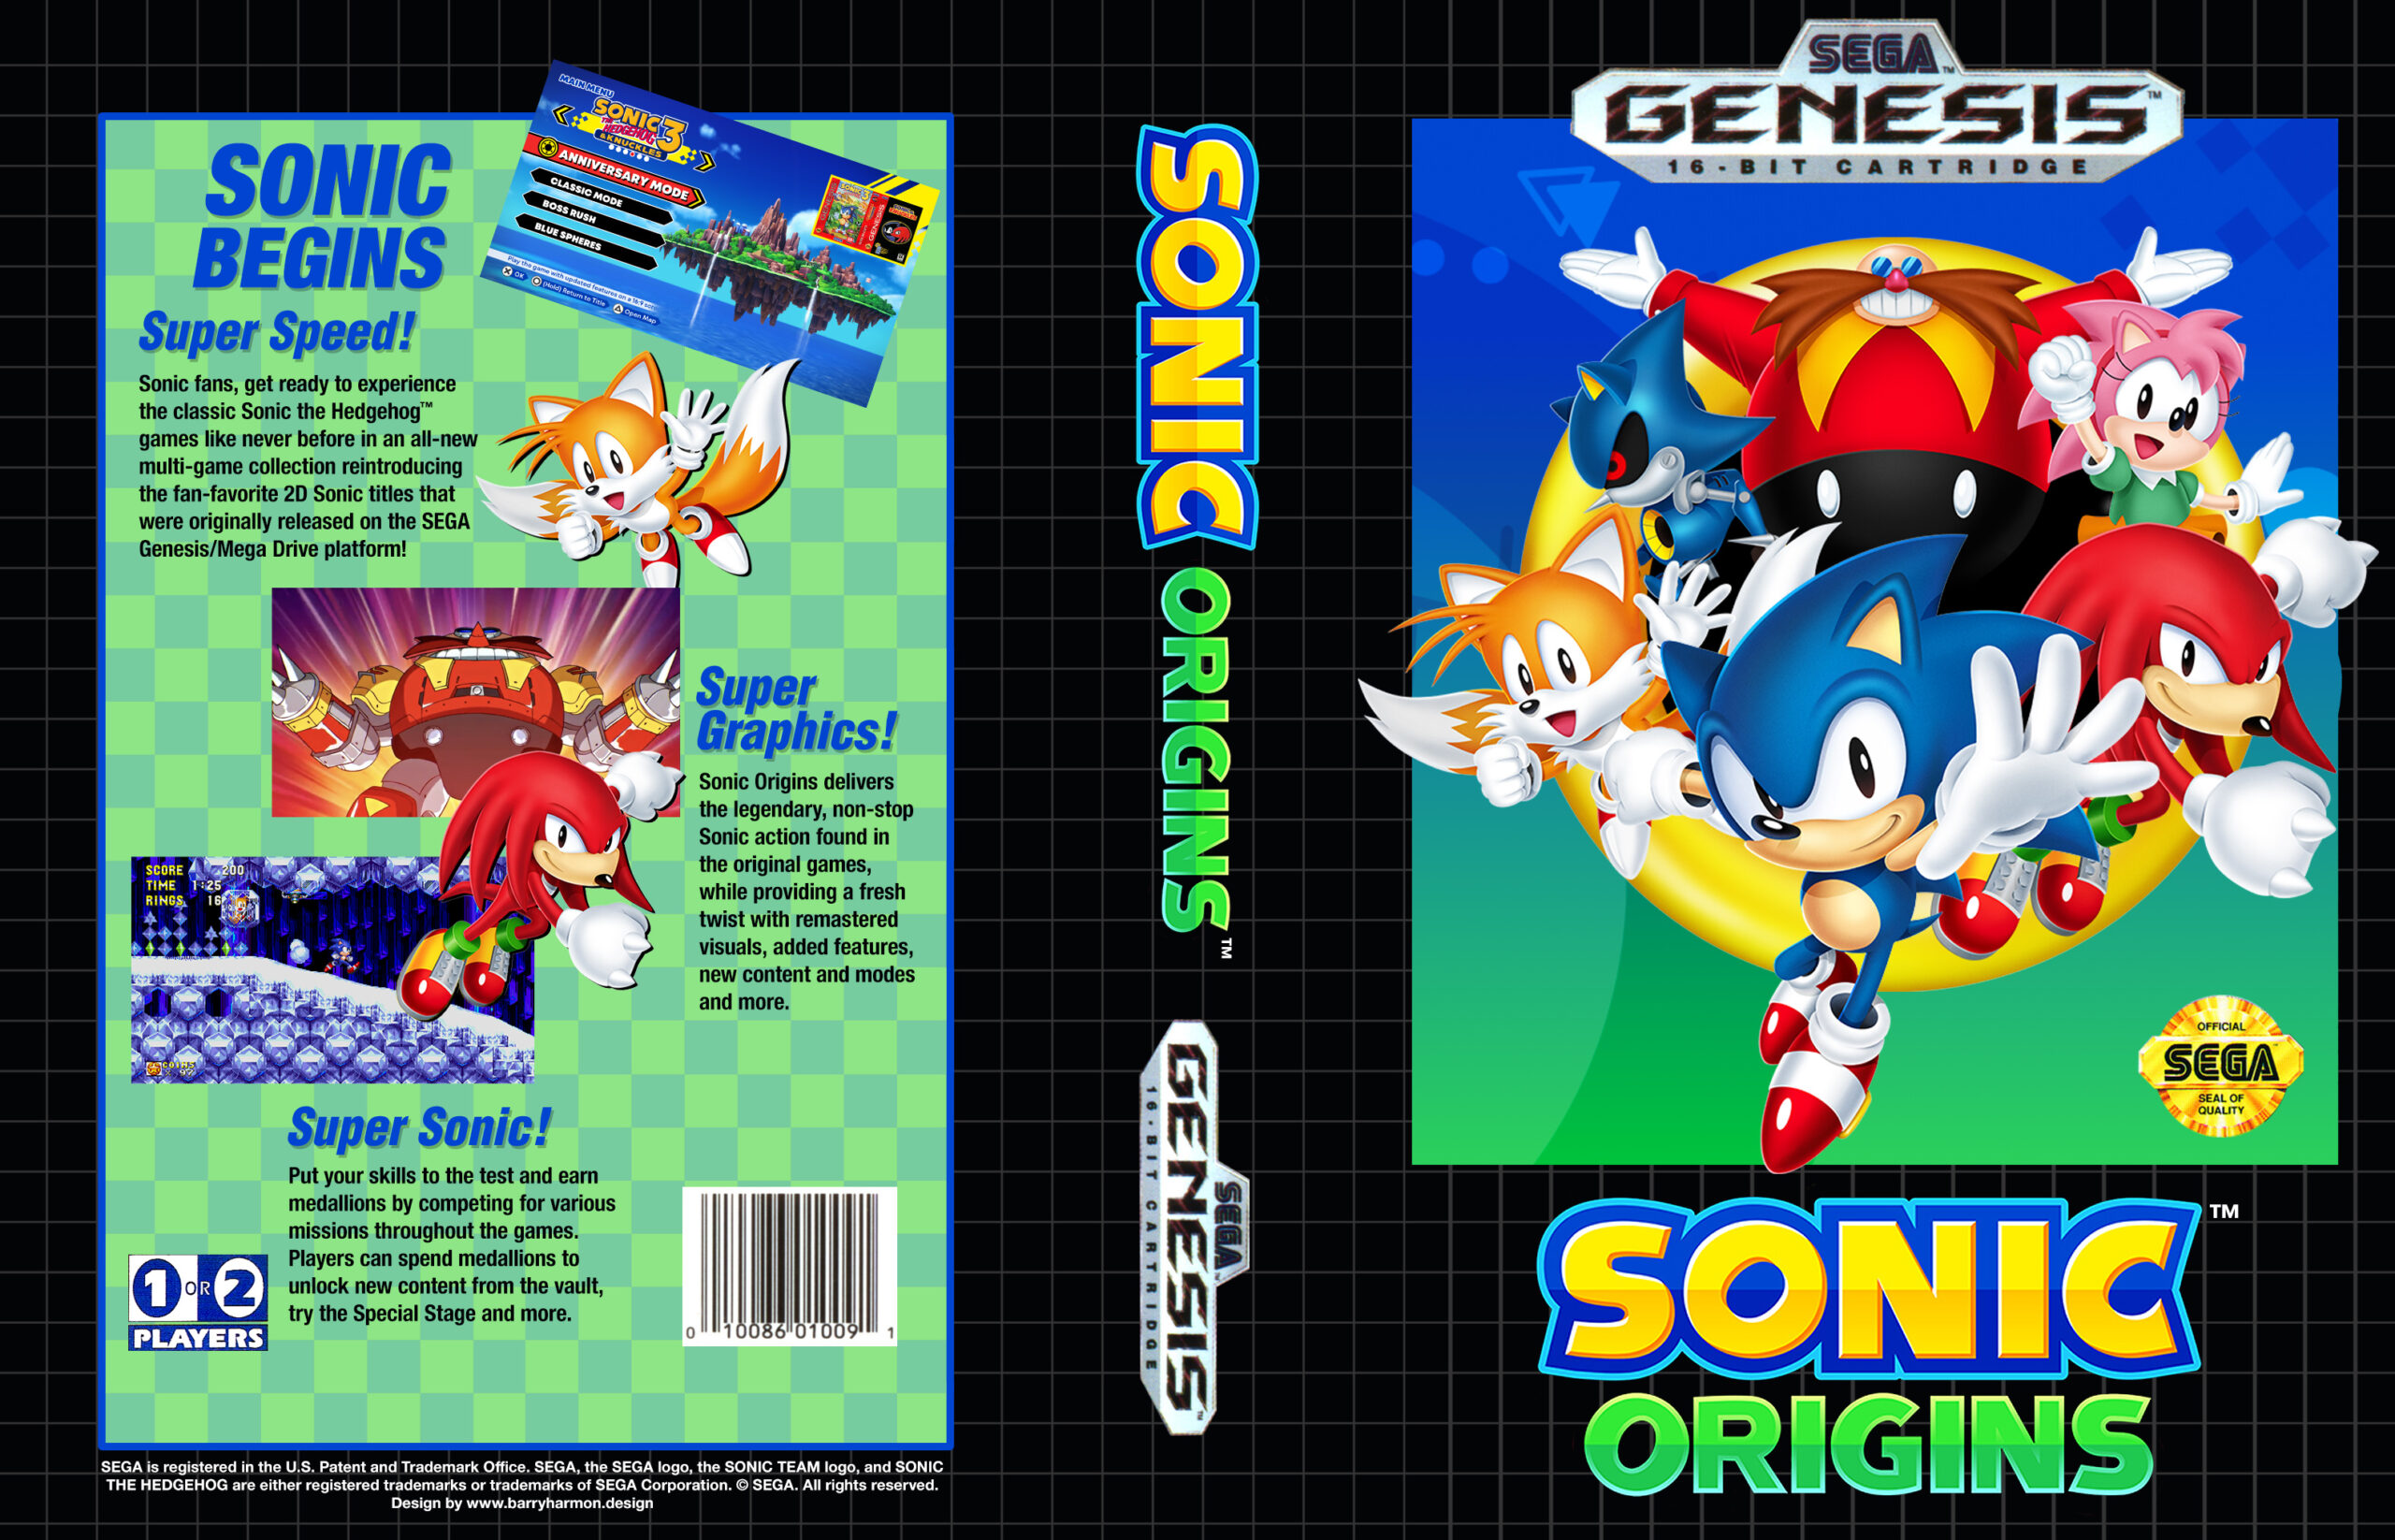 Play Genesis Sonic 2 - Score Rush Online in your browser 